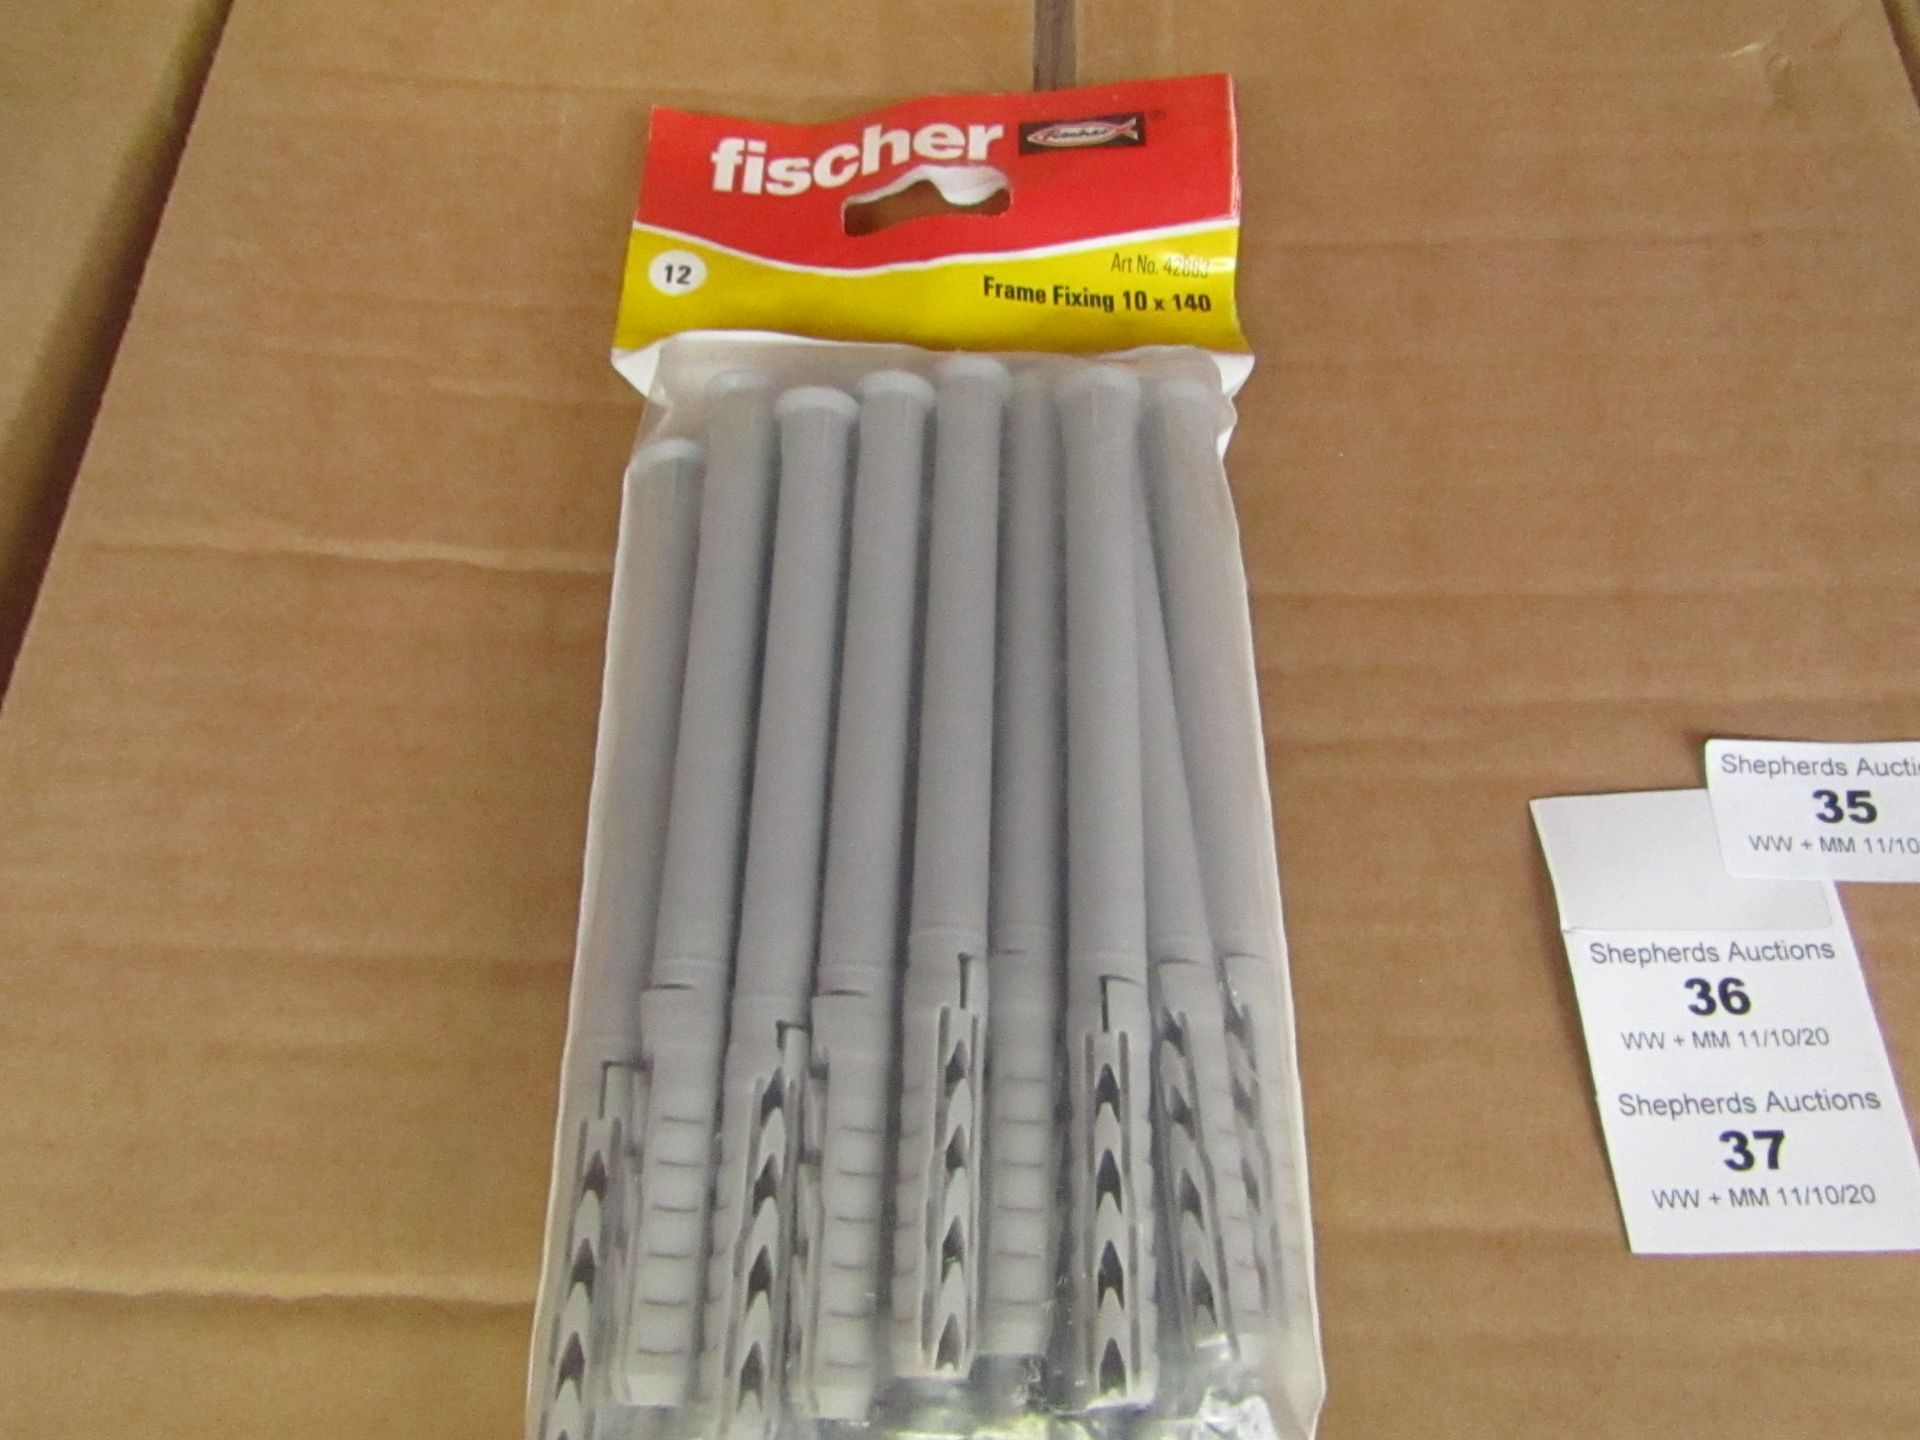 5x Fischer - Frame Fixing 8 x 140 (Packs of 12) - New & Packaged.